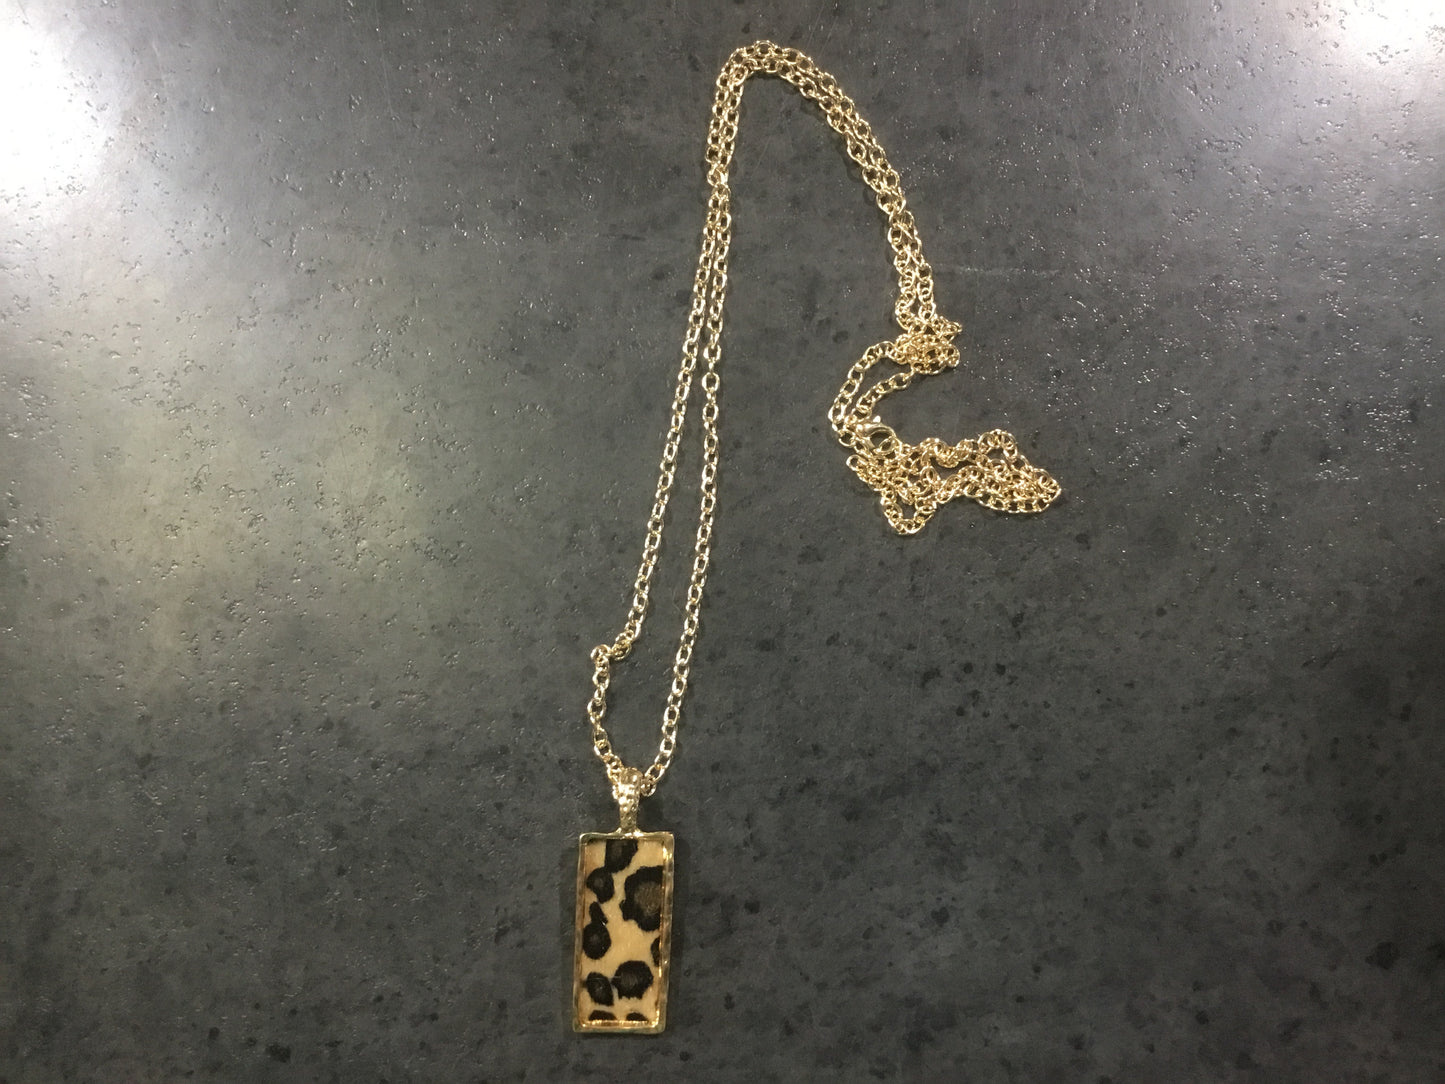 Animal print necklace gold chain